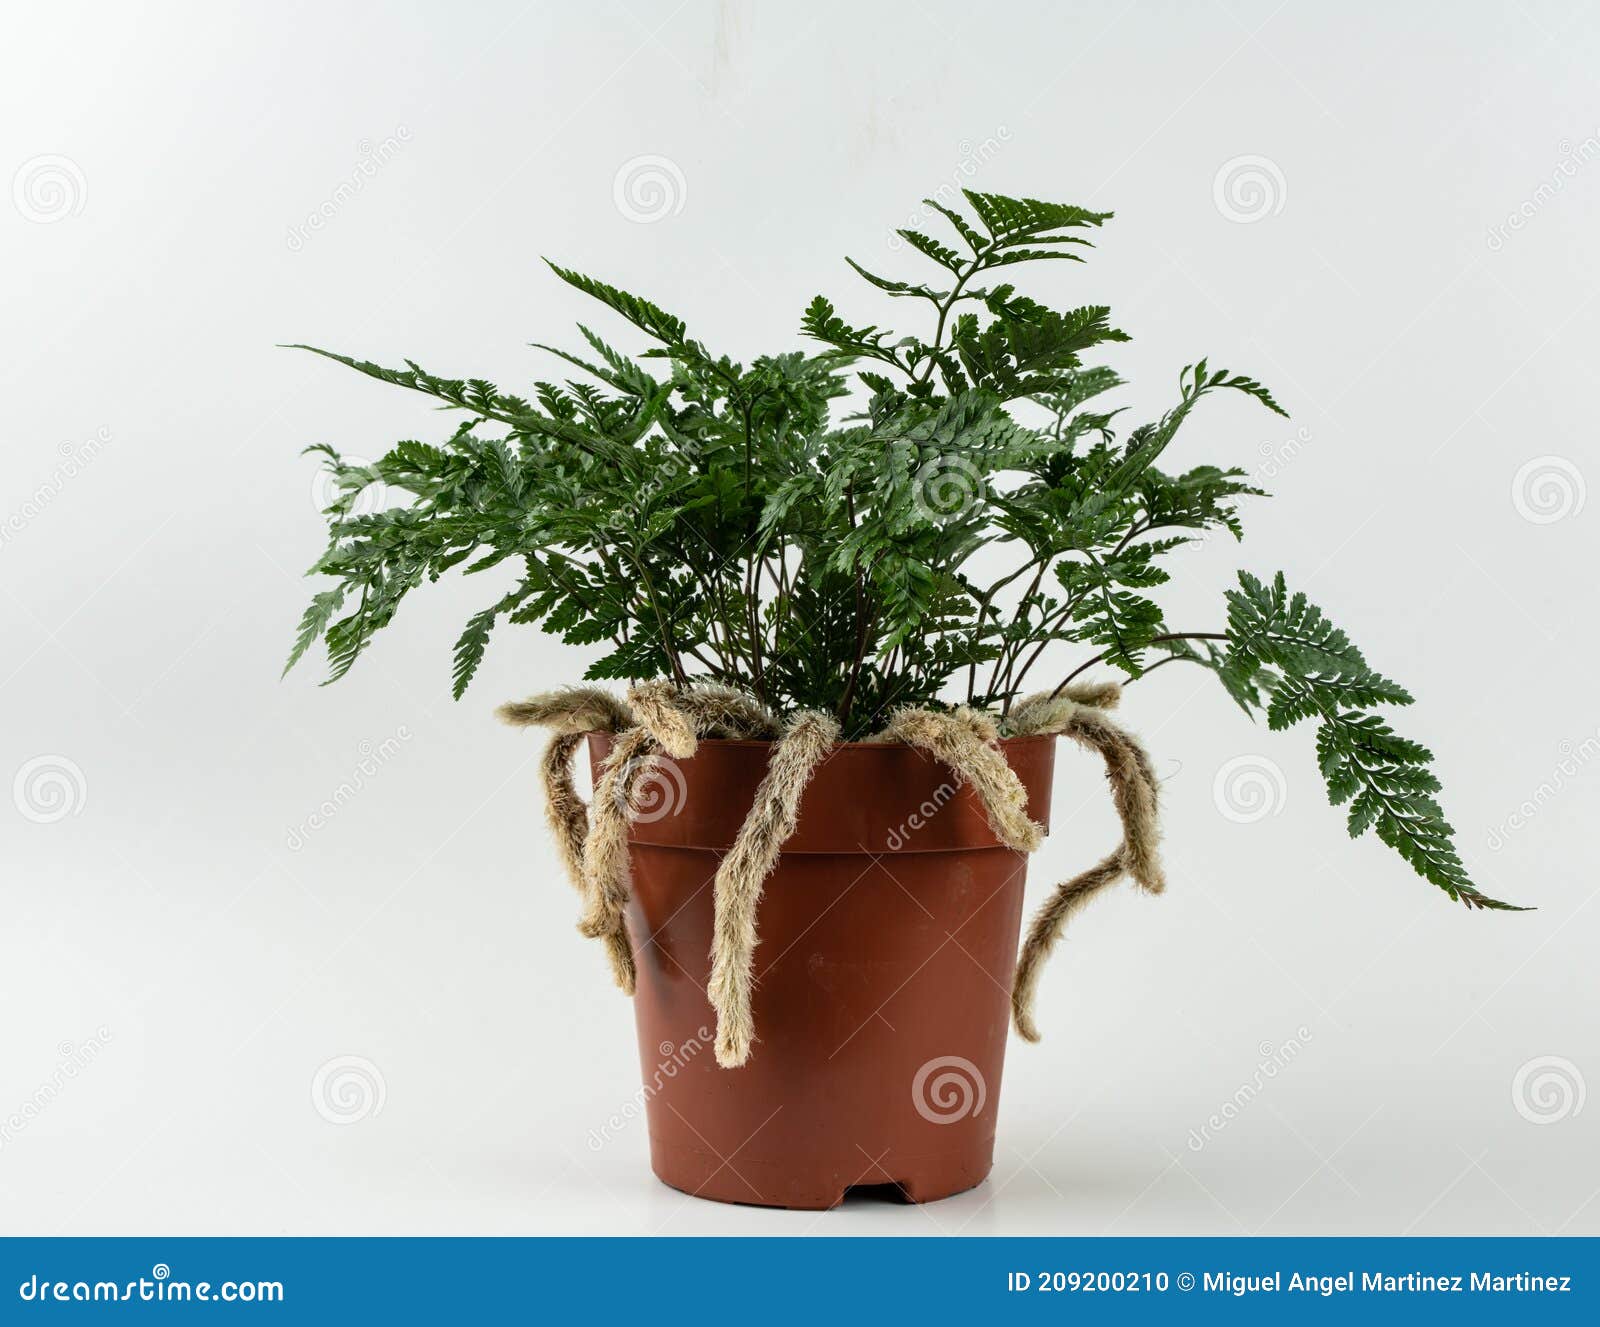 davallia mariesii in brown pot with white background